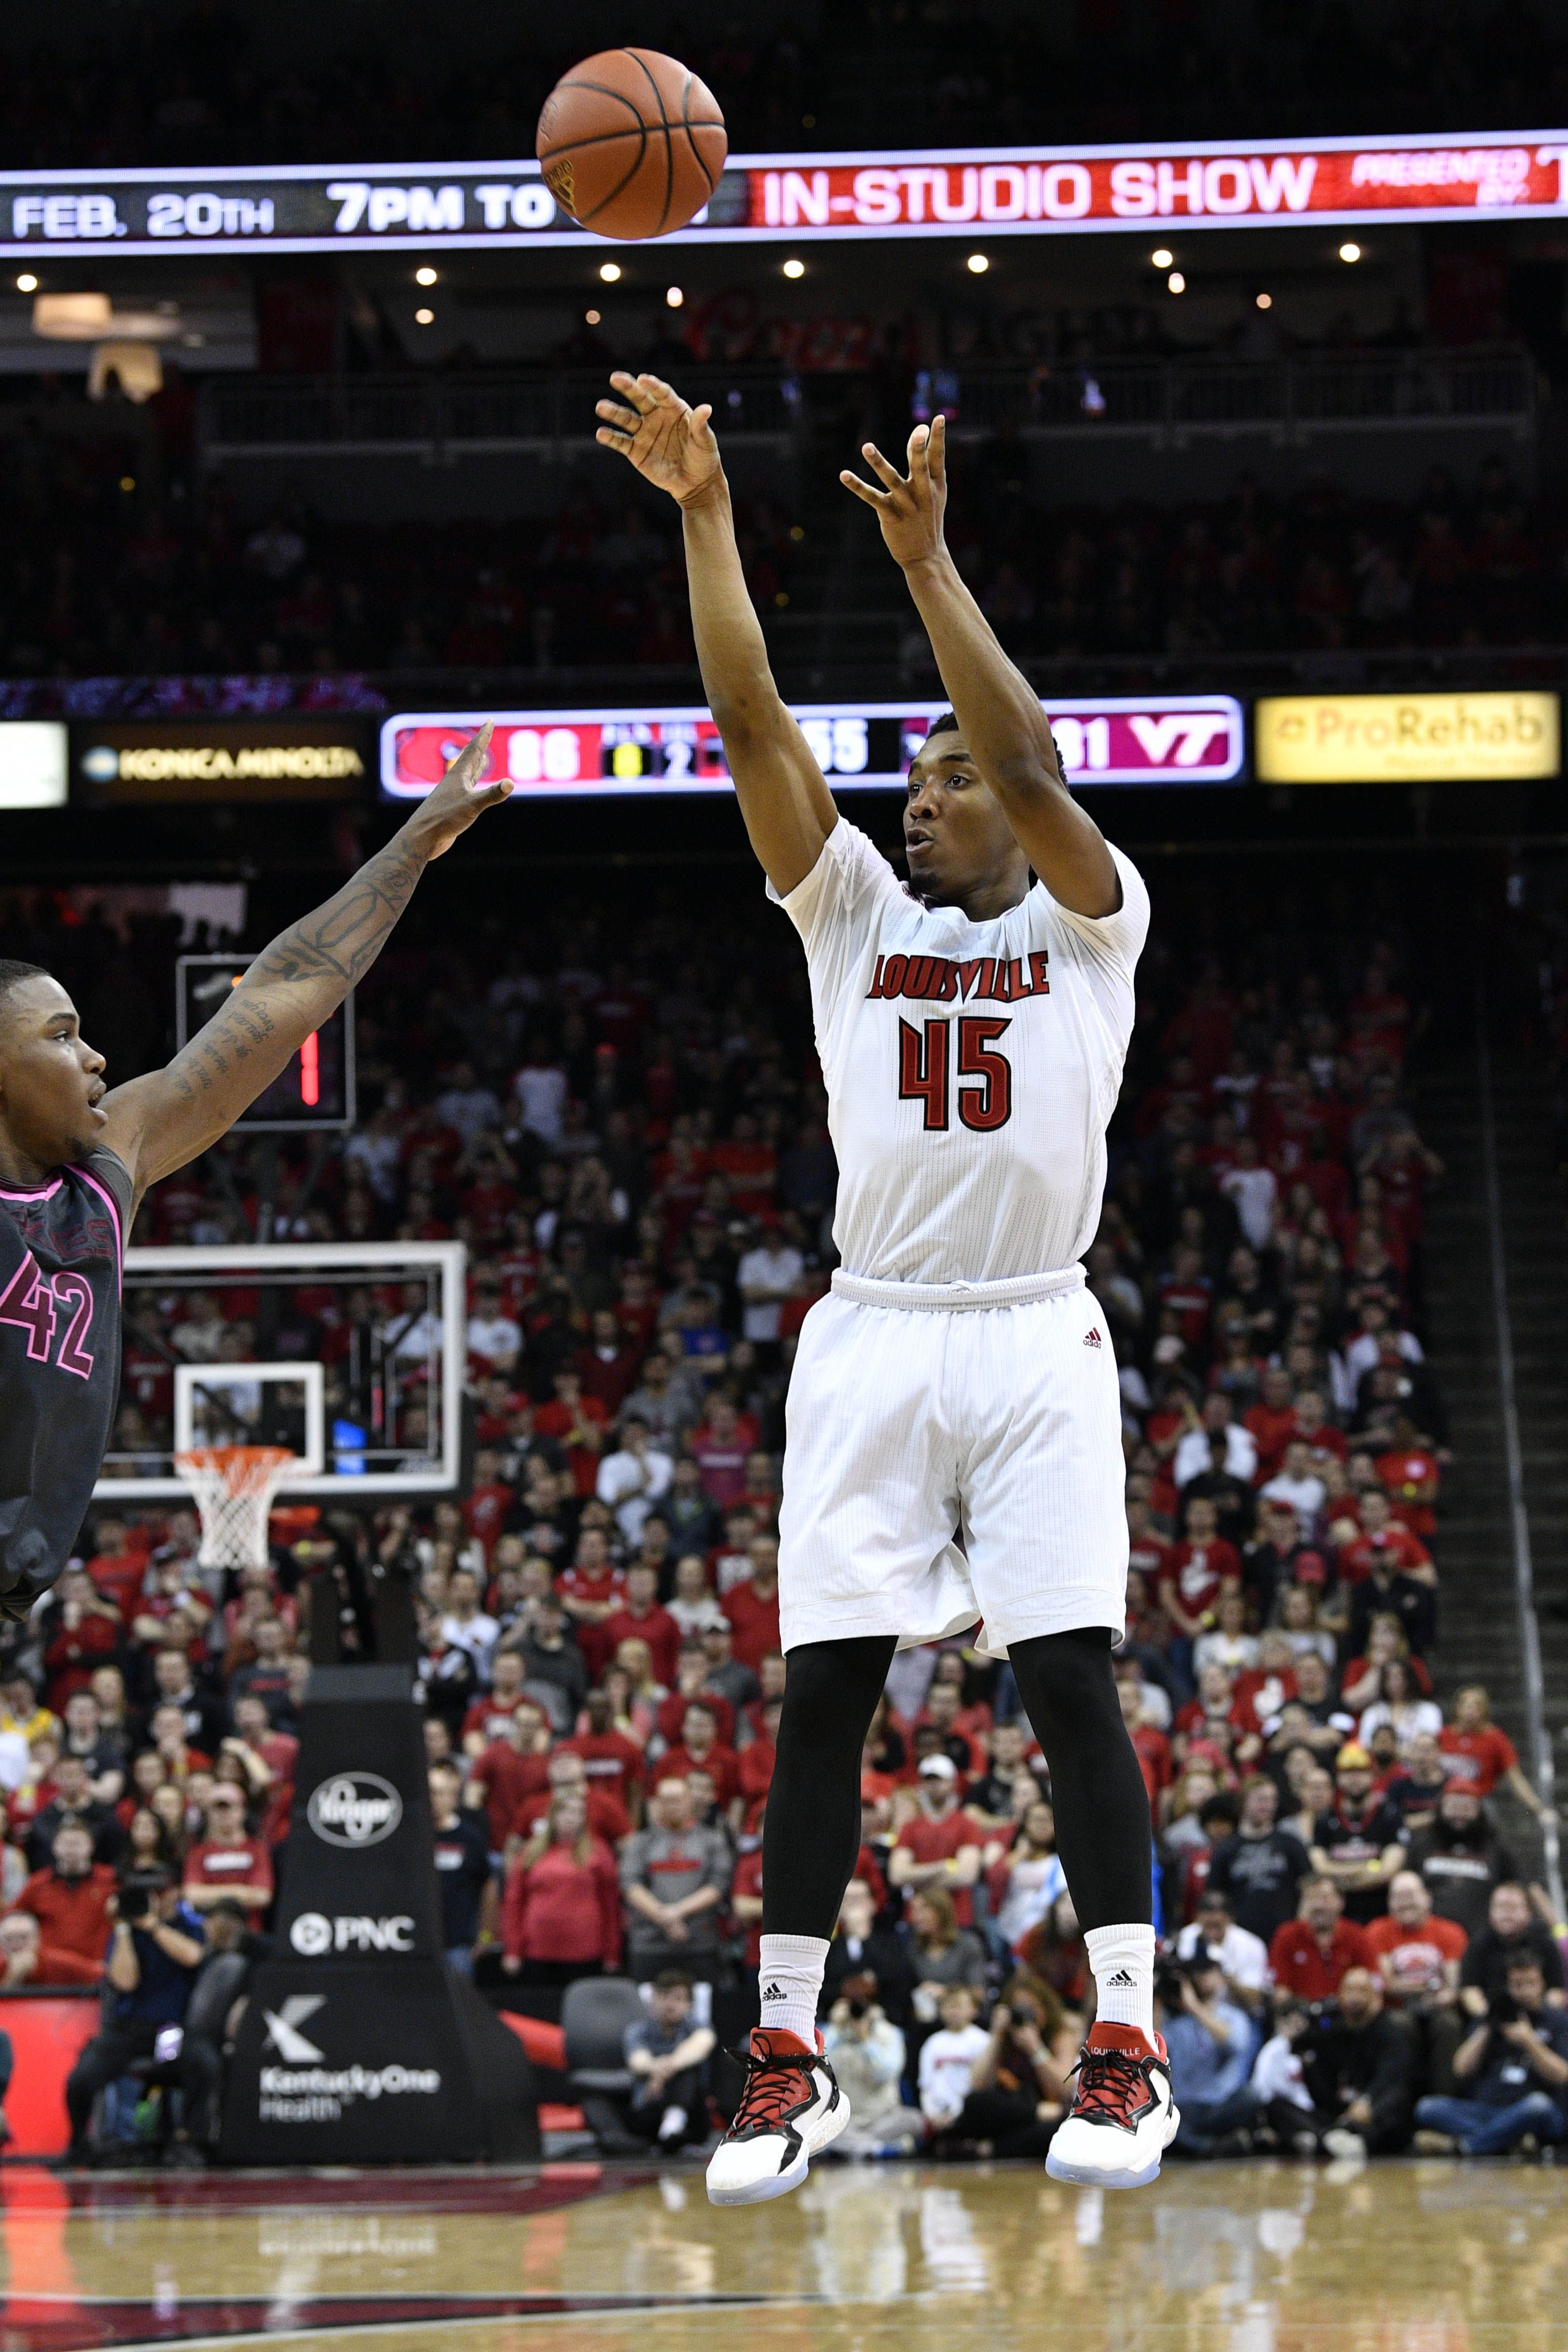 NBA Draft Analysis: What to Expect from Louisville's Donovan